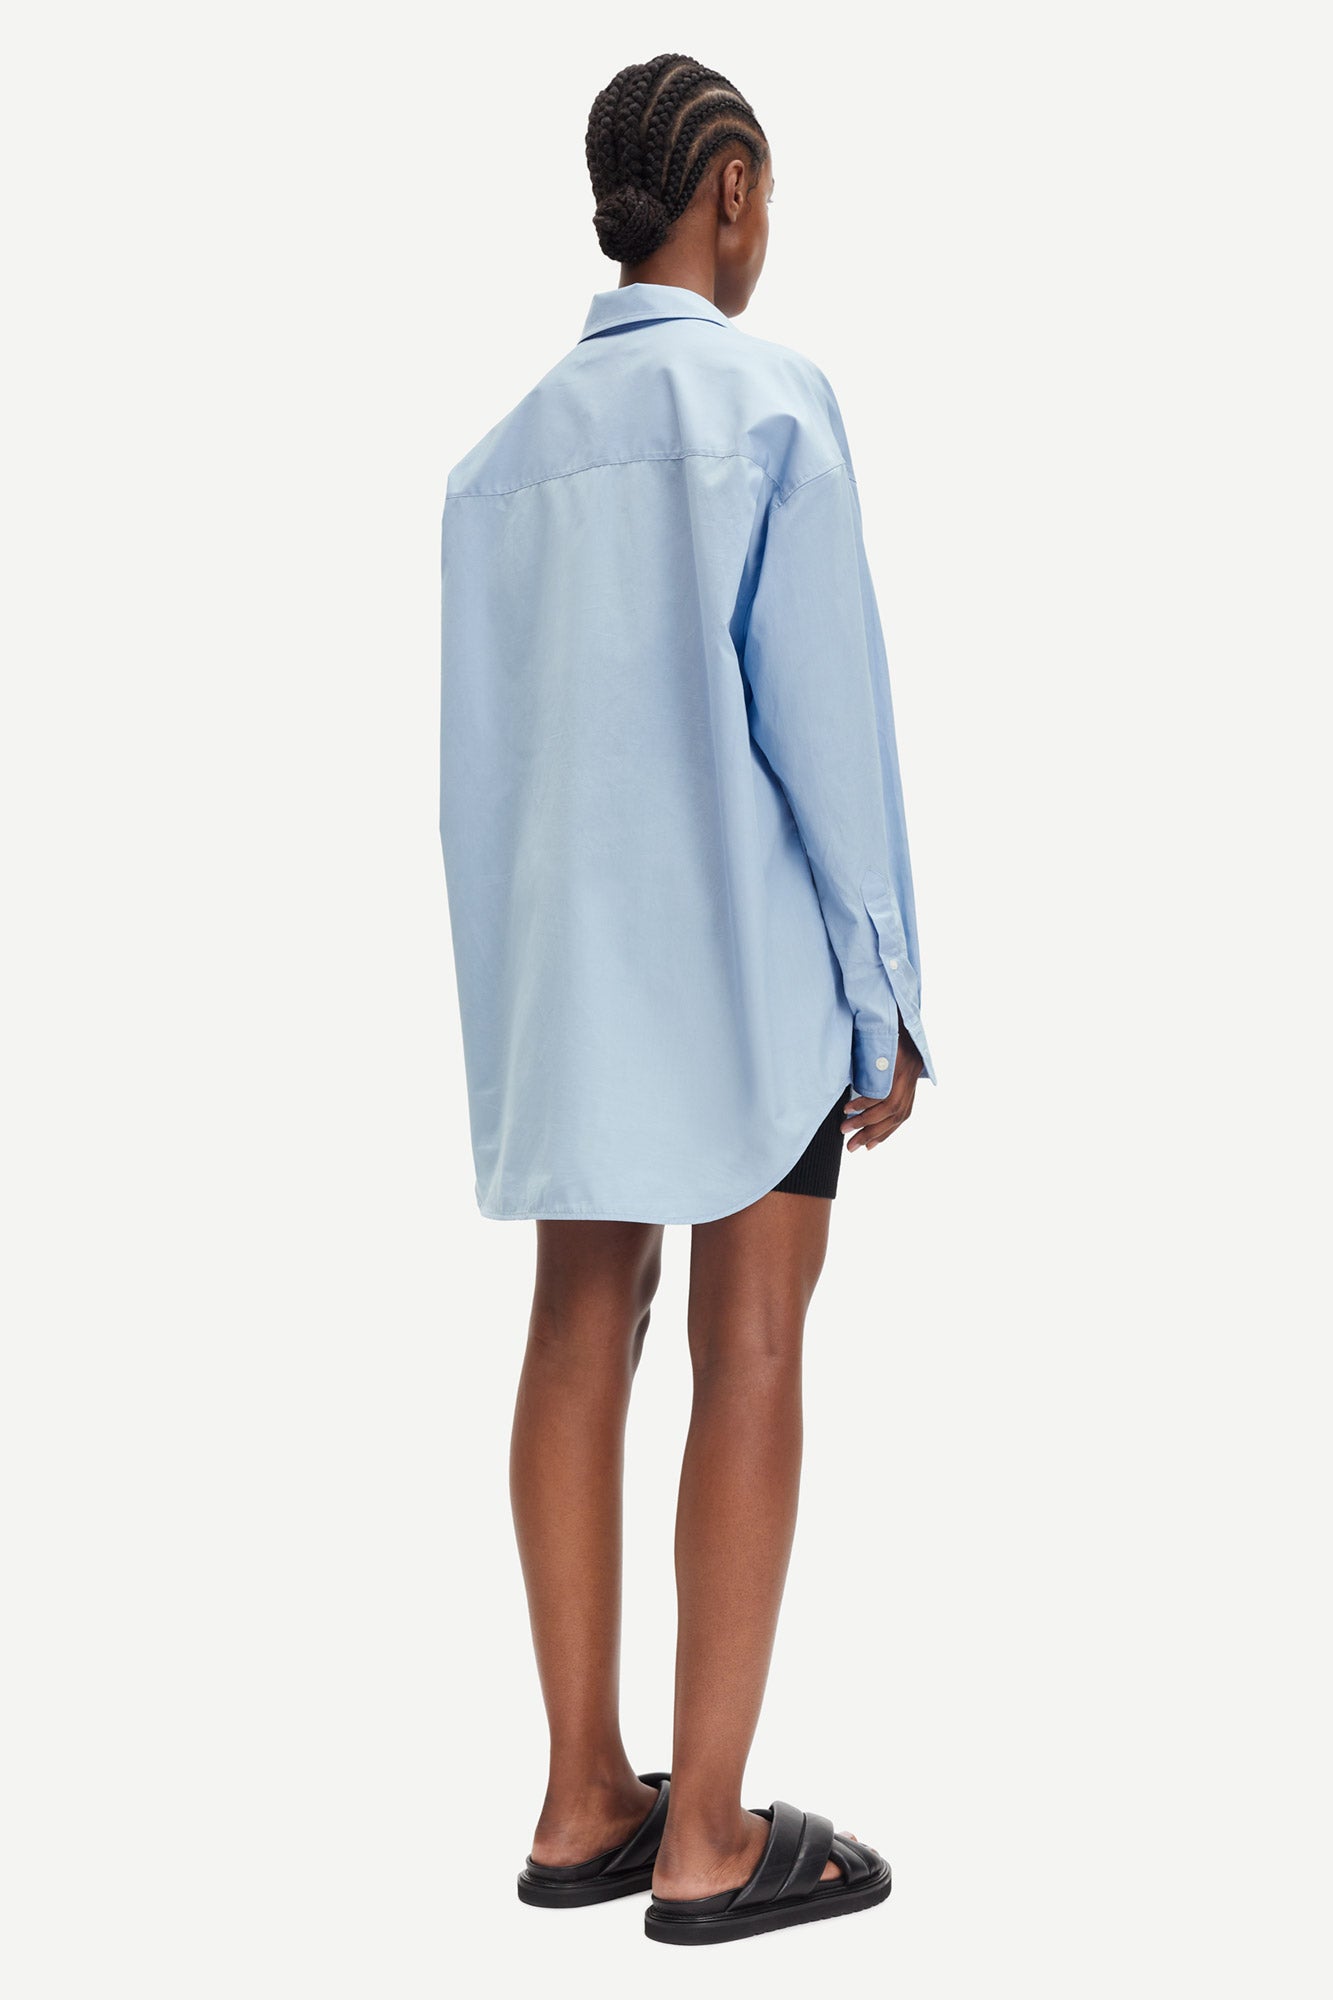 OVERSIZED SHIRT WITH CHEST POCKET IN SERENITY